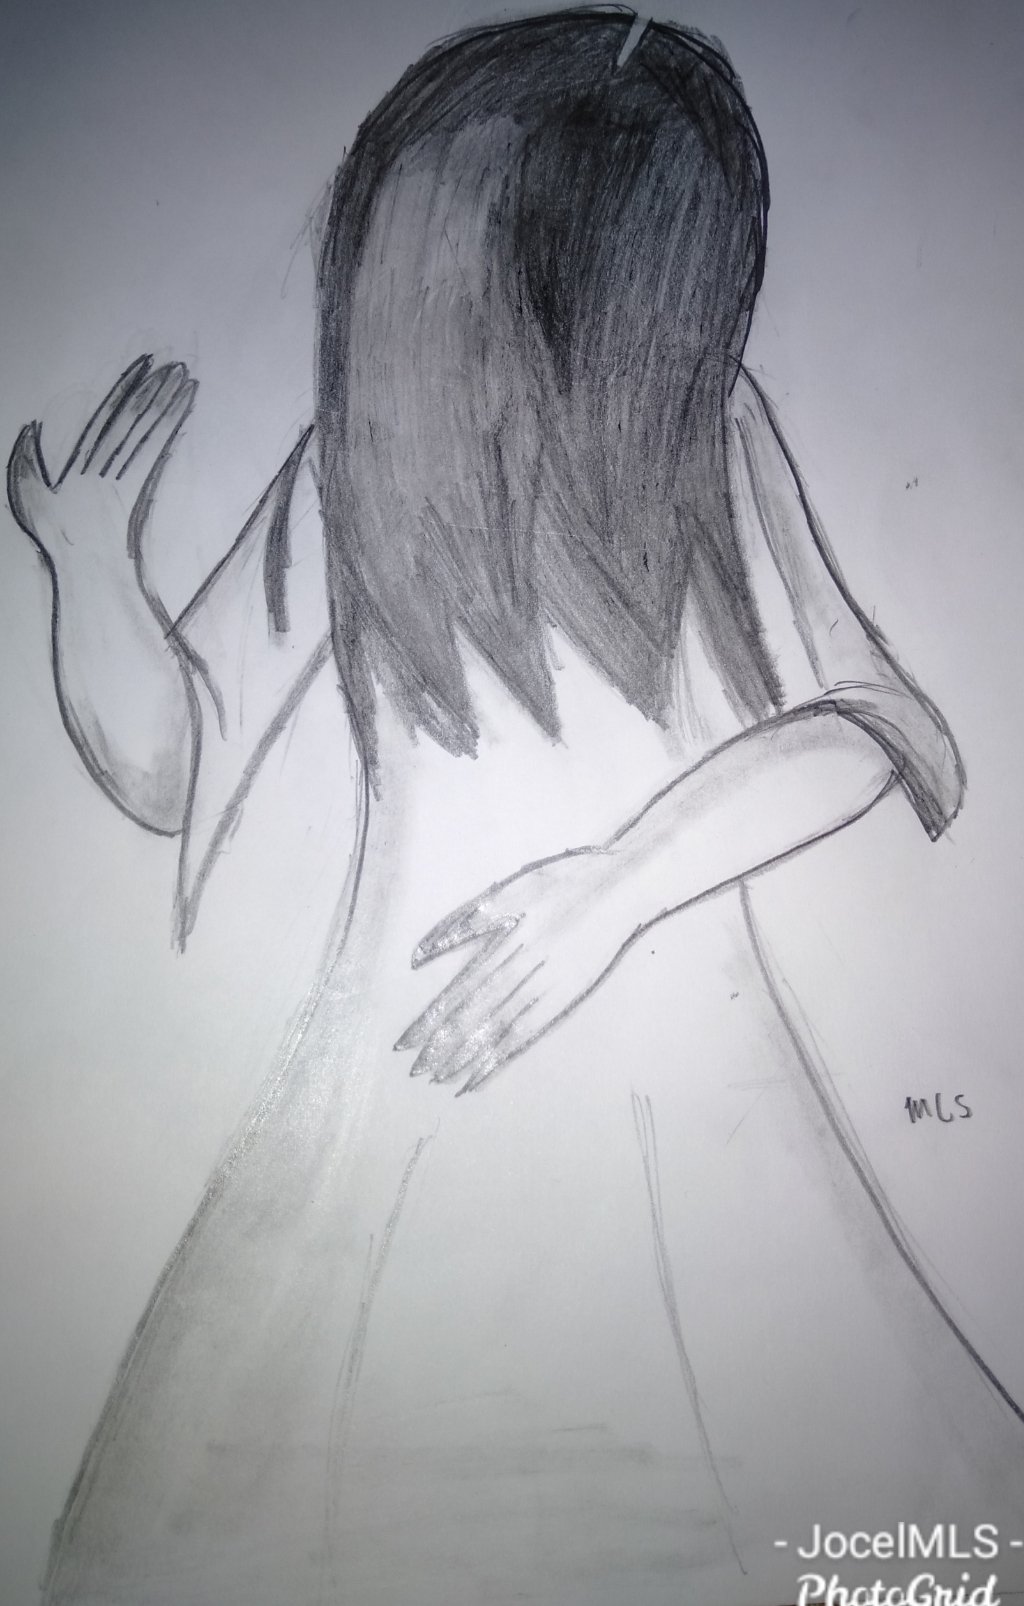 Lexica - A ghost in gloomy woods pencil sketch